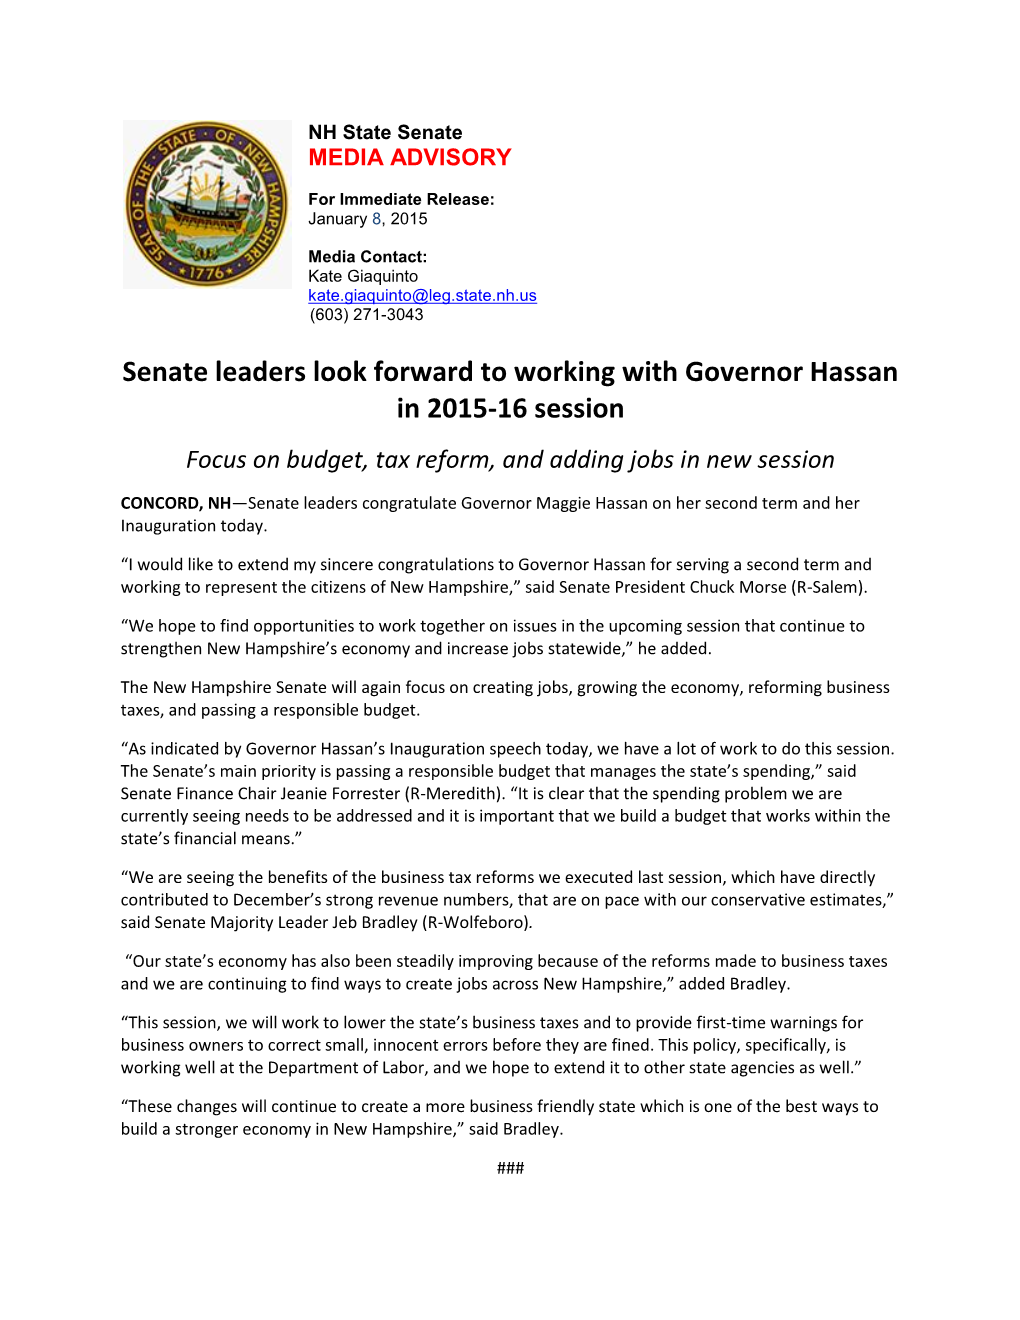 Senate Leaders Look Forward to Working with Governor Hassan in 2015-16 Session Focus on Budget, Tax Reform, and Adding Jobs in New Session